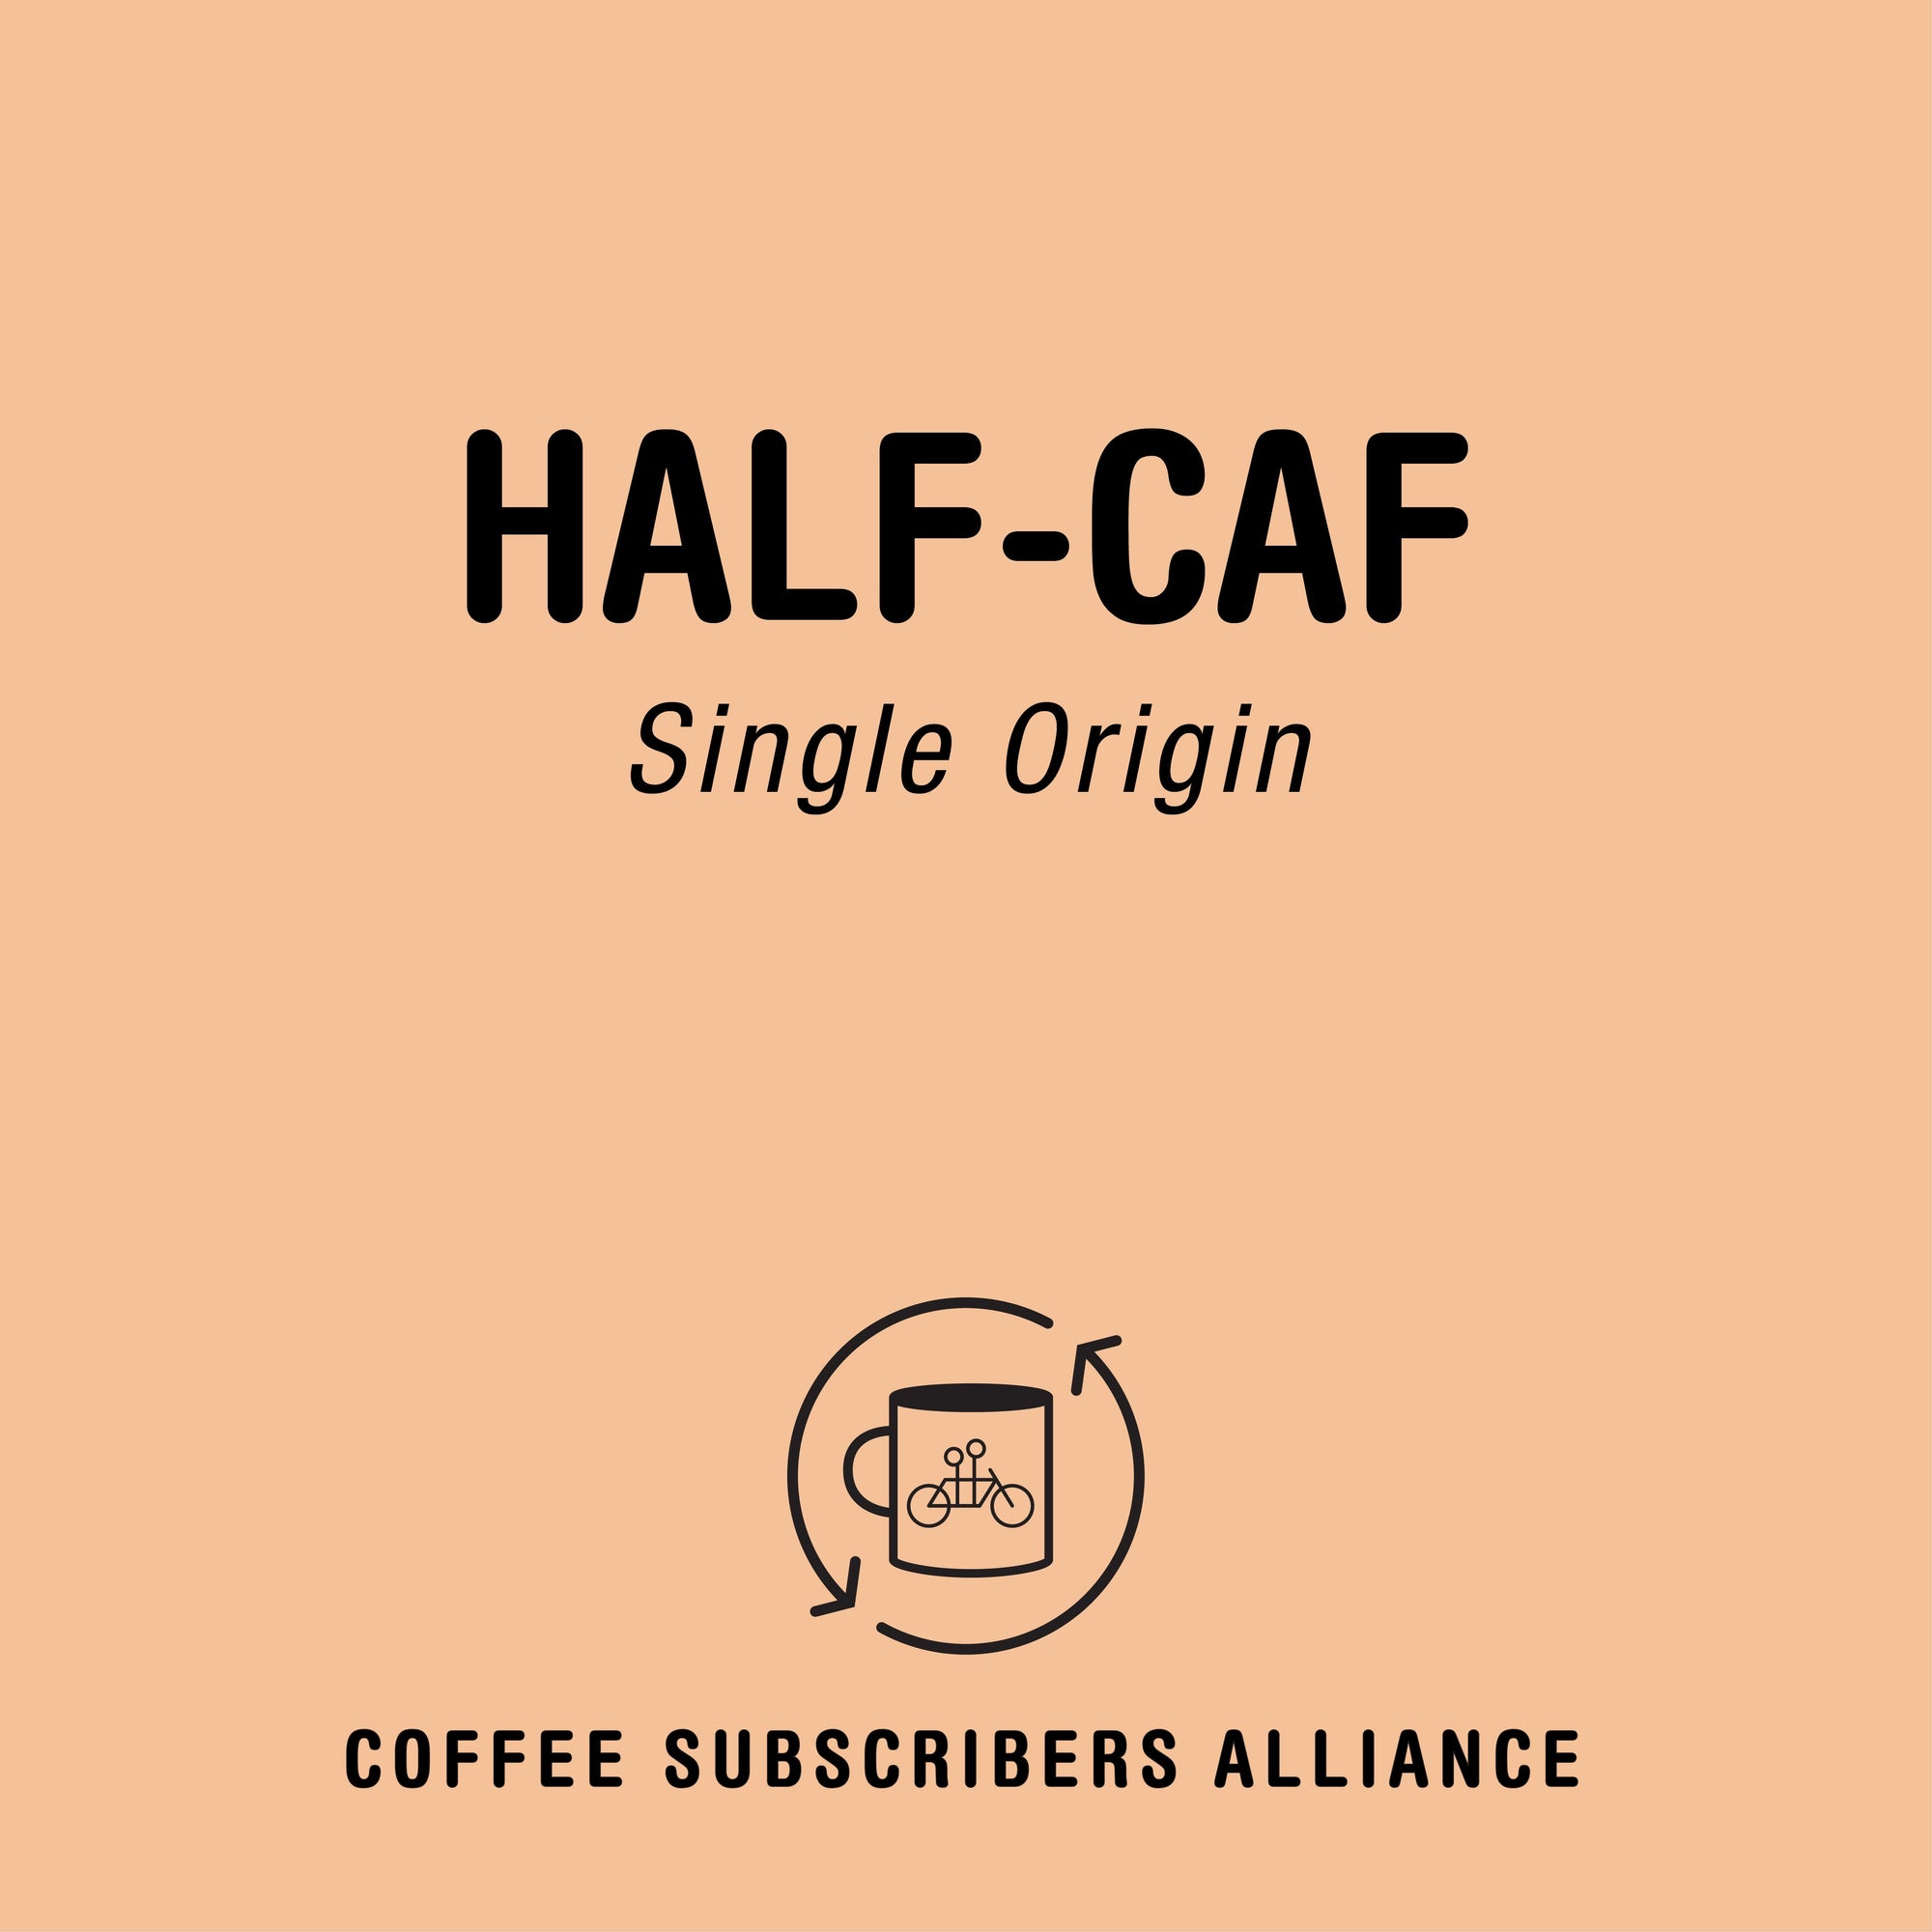 A minimalist advertisement for Tandem's "Half-Caf Subscription Gift 8 Weeks x 12" with a circular logo depicting a coffee cup with coffee beans, labeled "coffee subscription alliance" on a peach background.